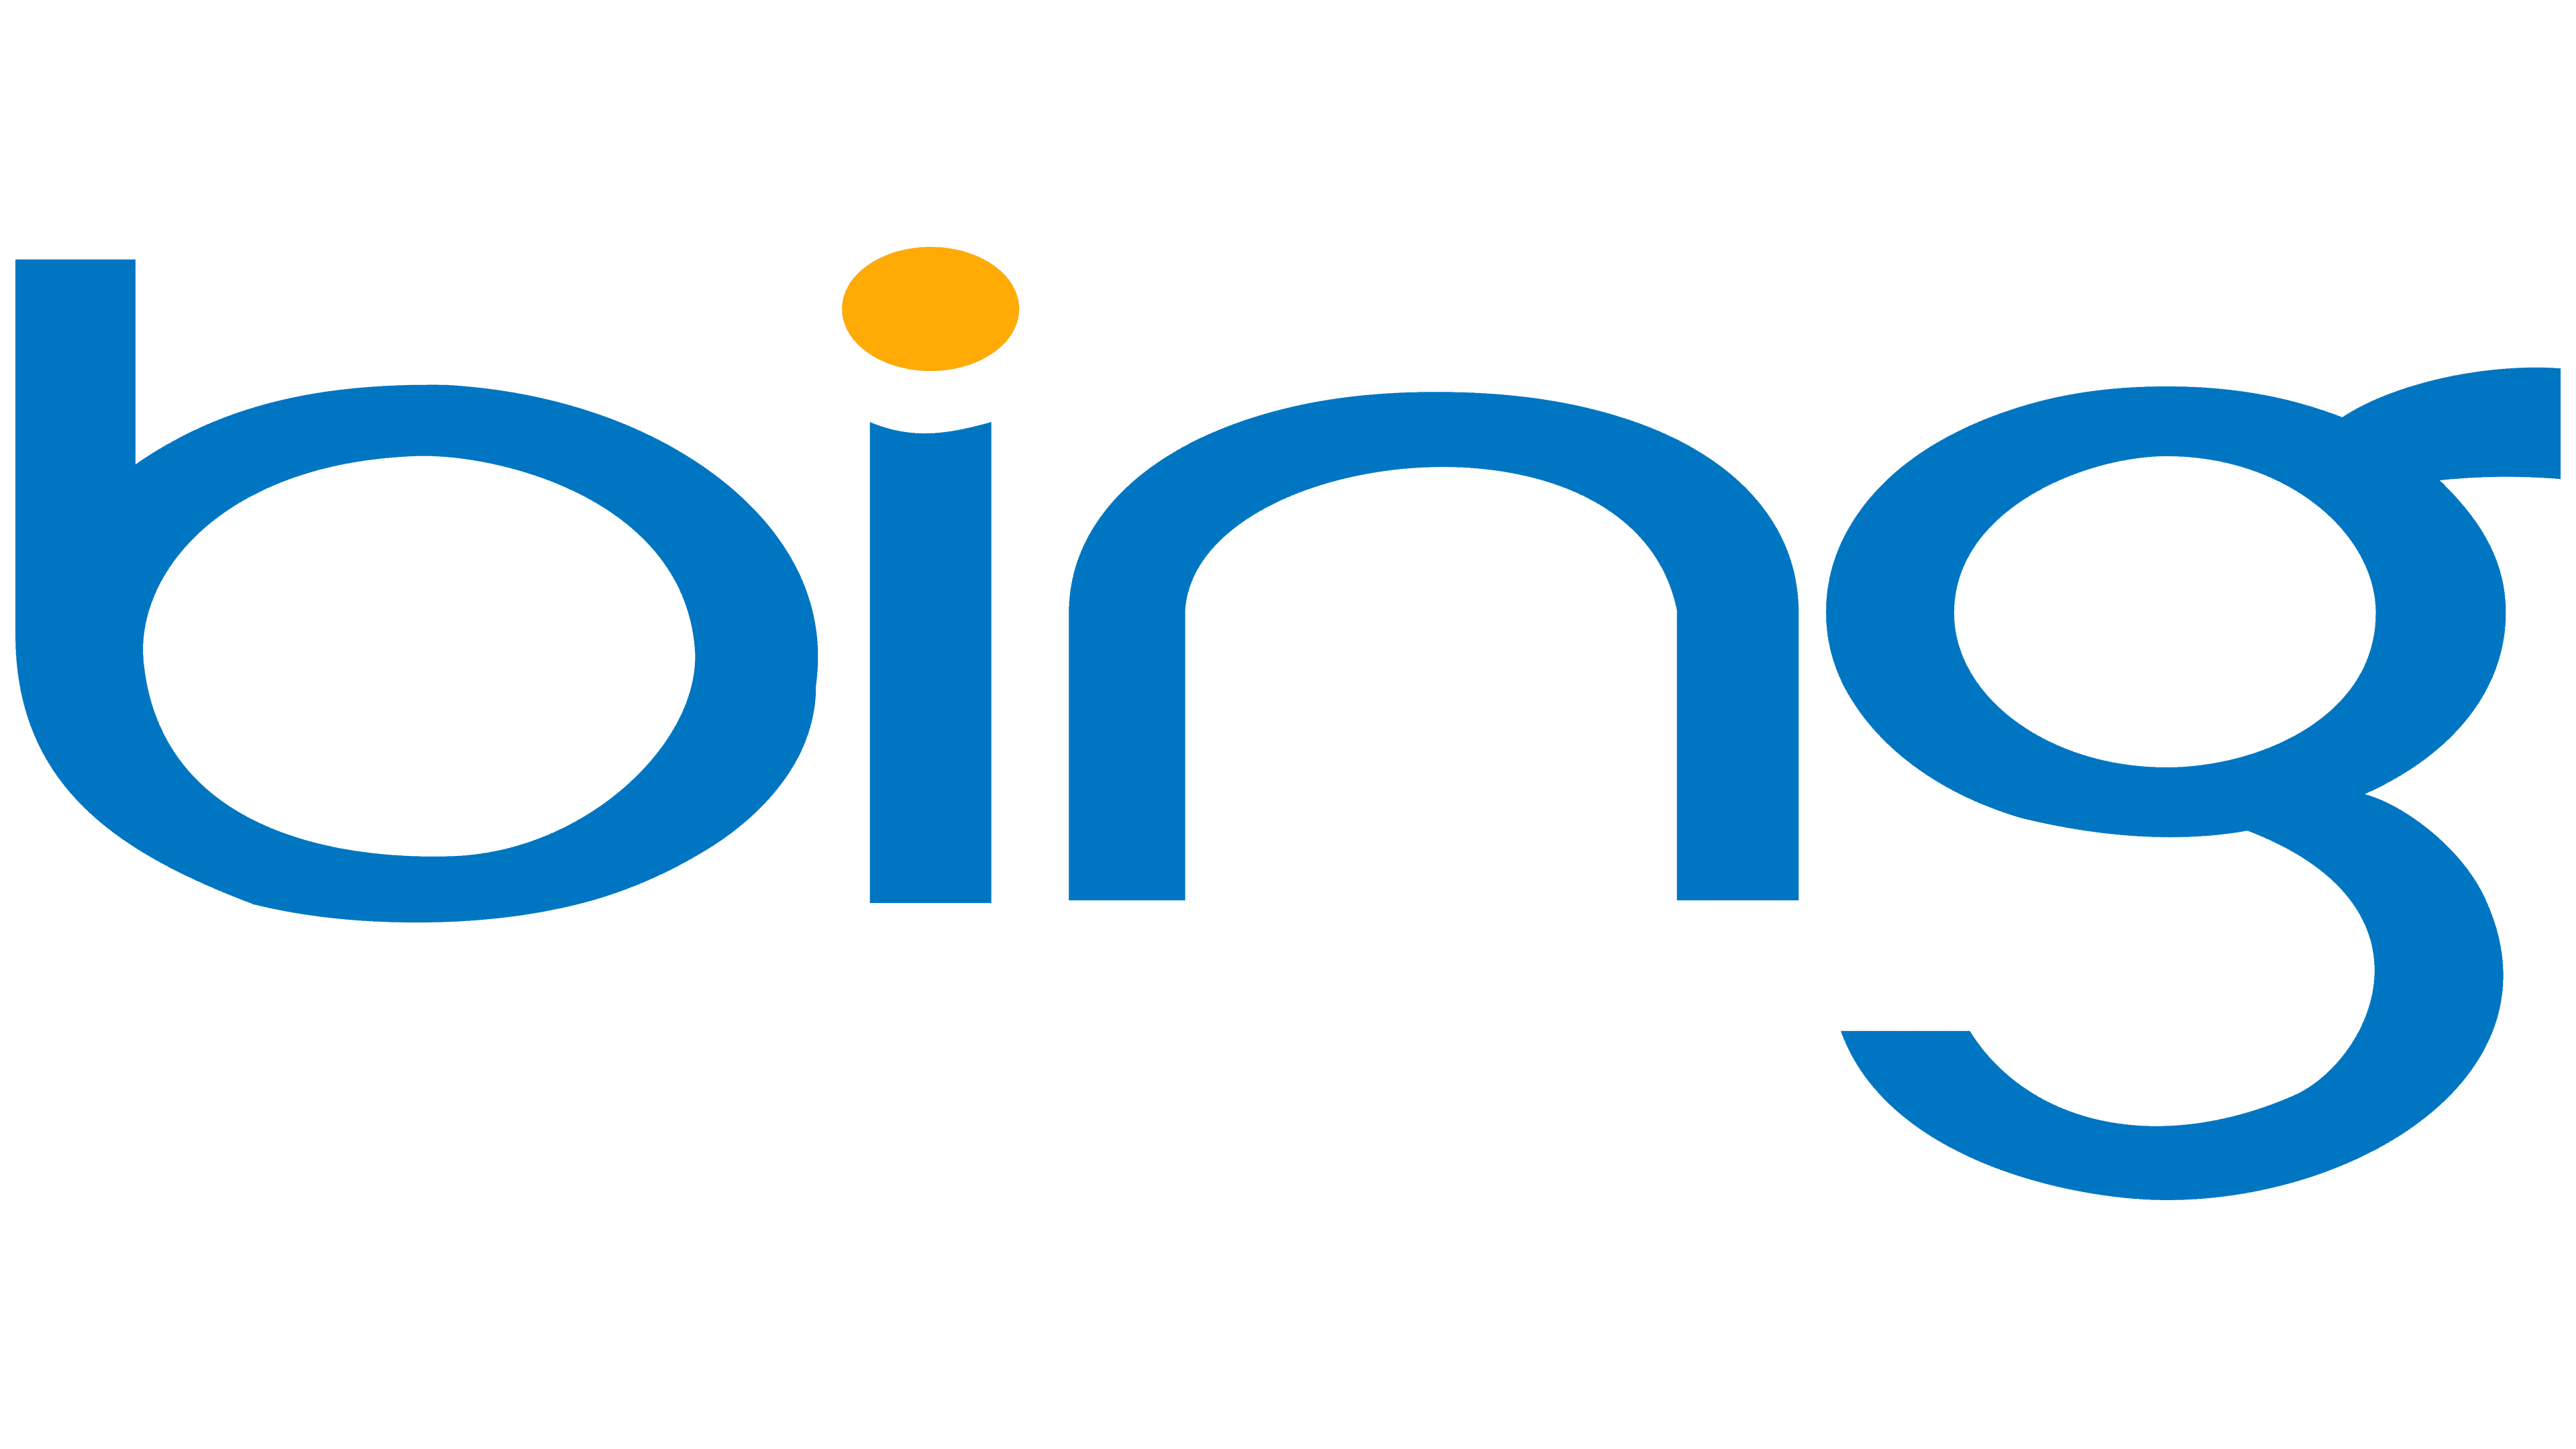 Bing Logo Symbol Meaning History Png Brand